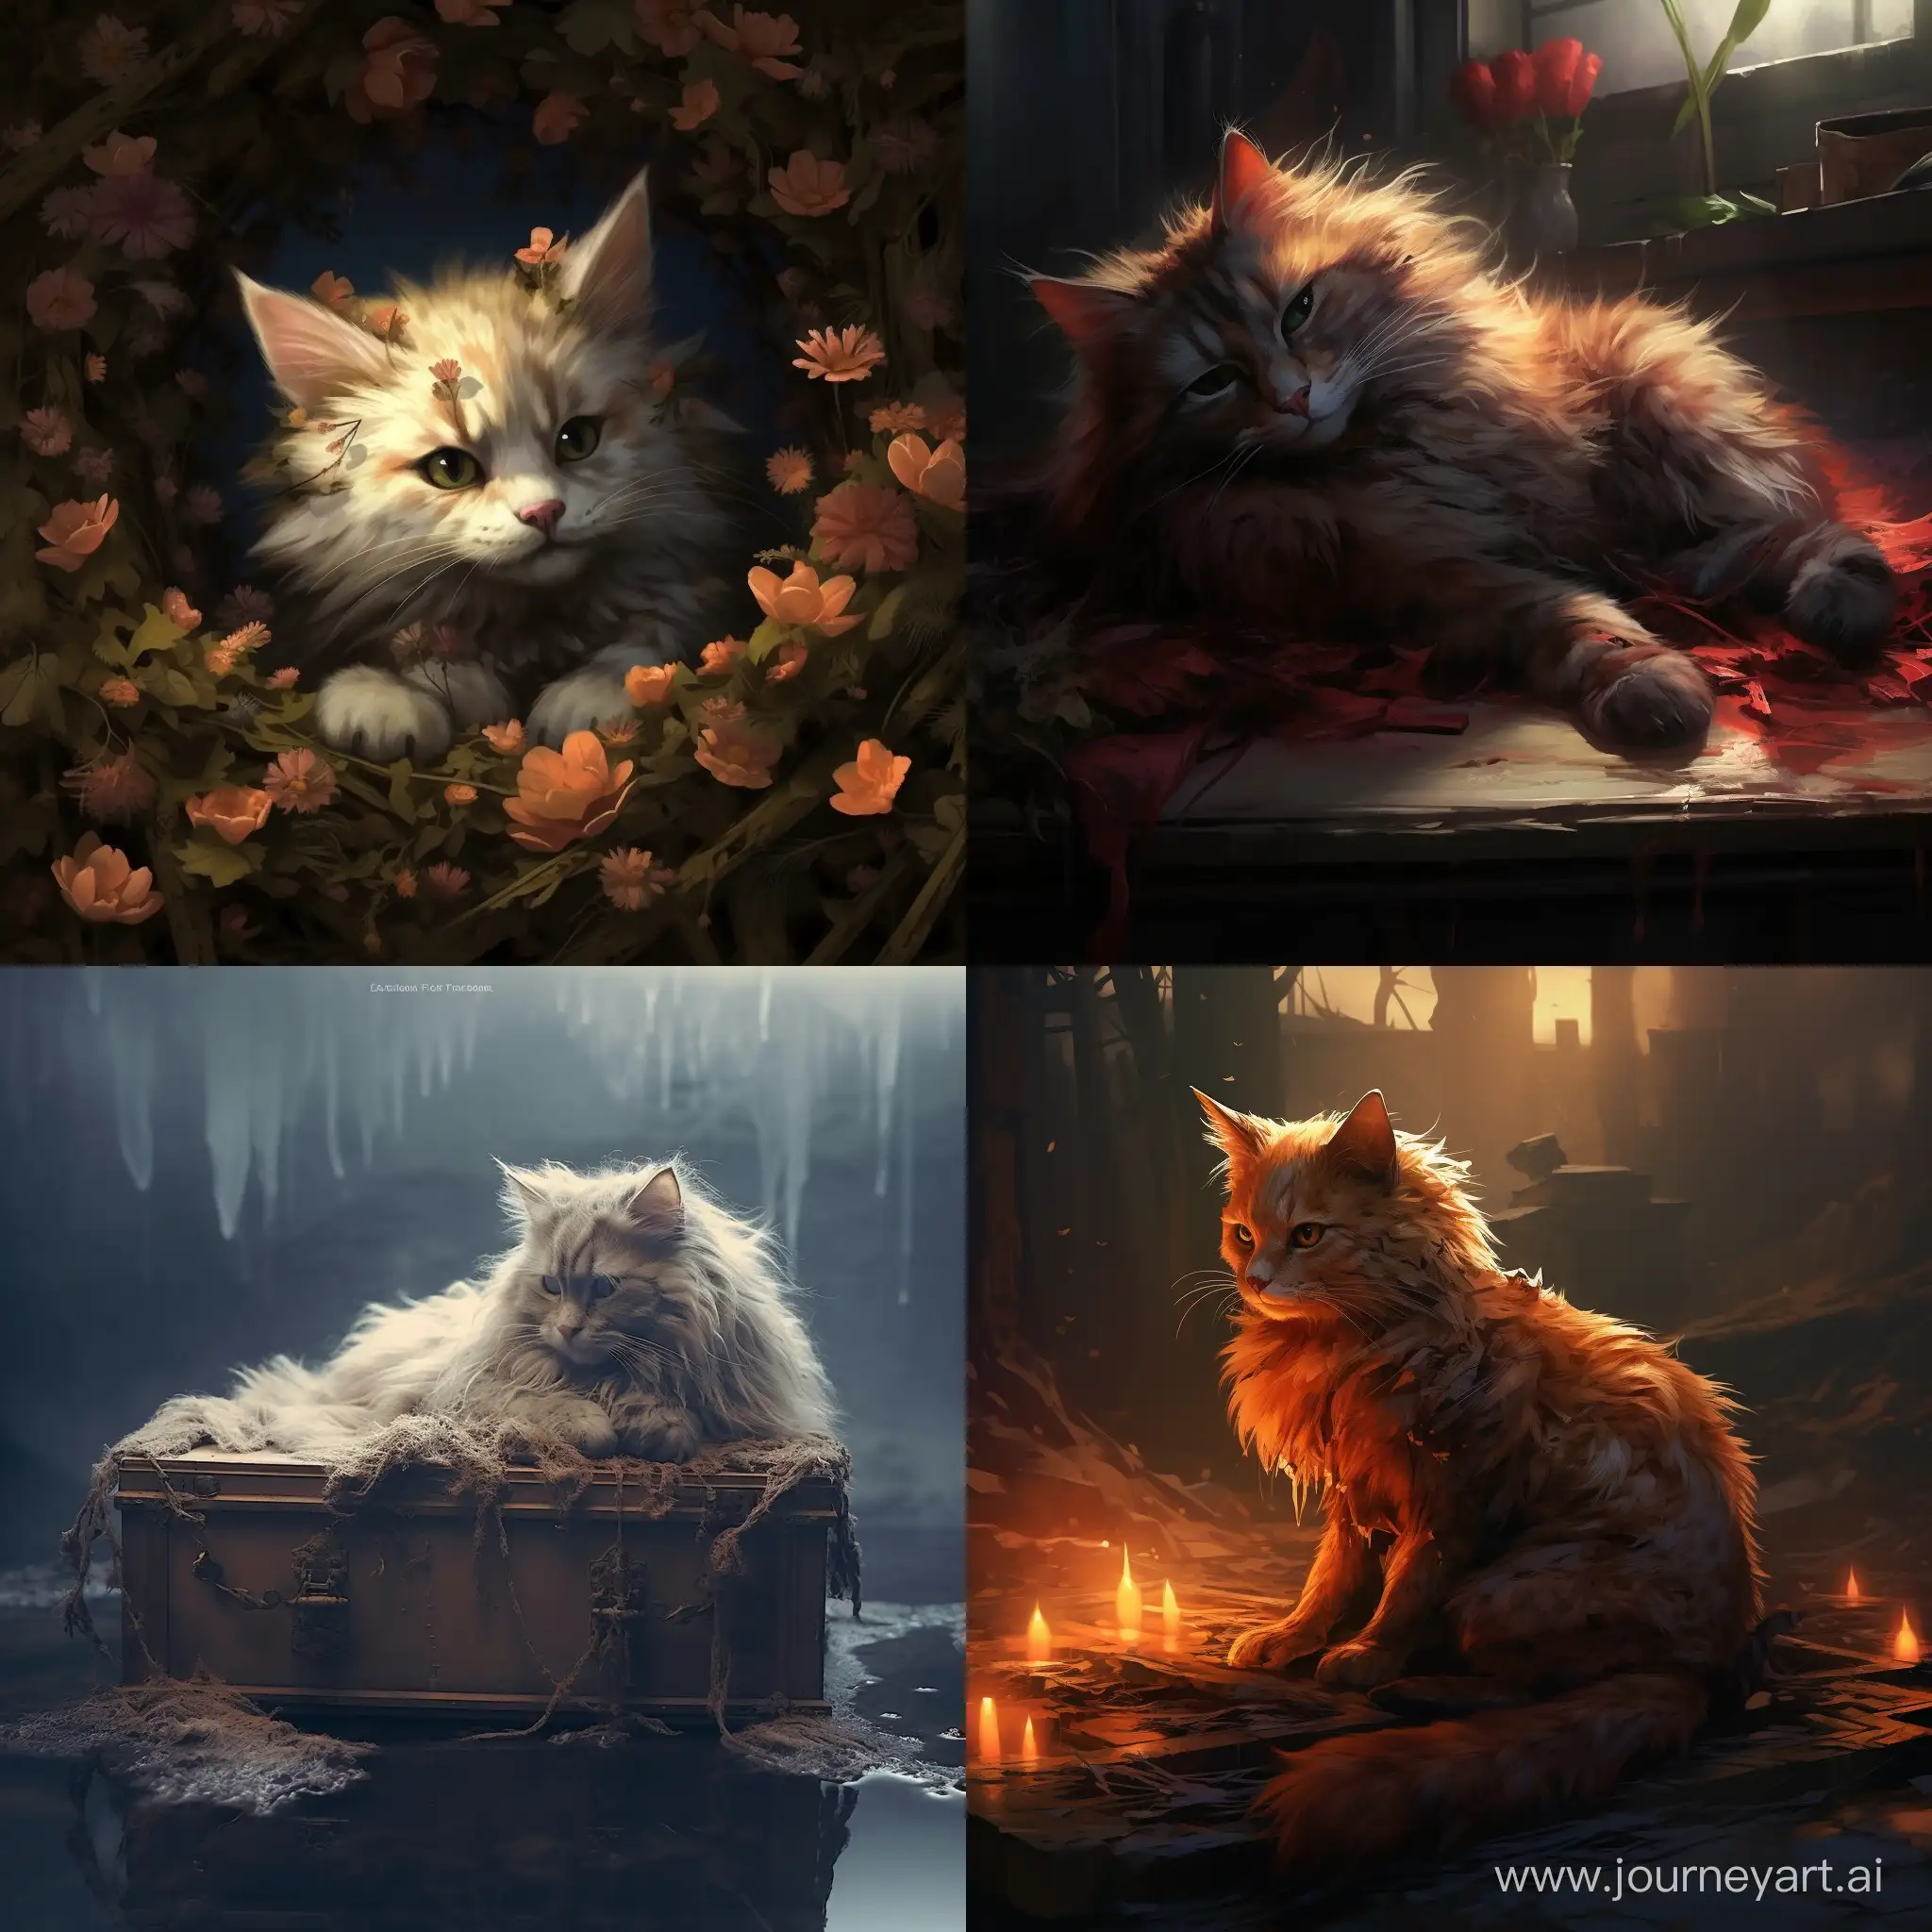 Ethereal-Farewell-Departure-of-a-Beloved-Kittys-Soul